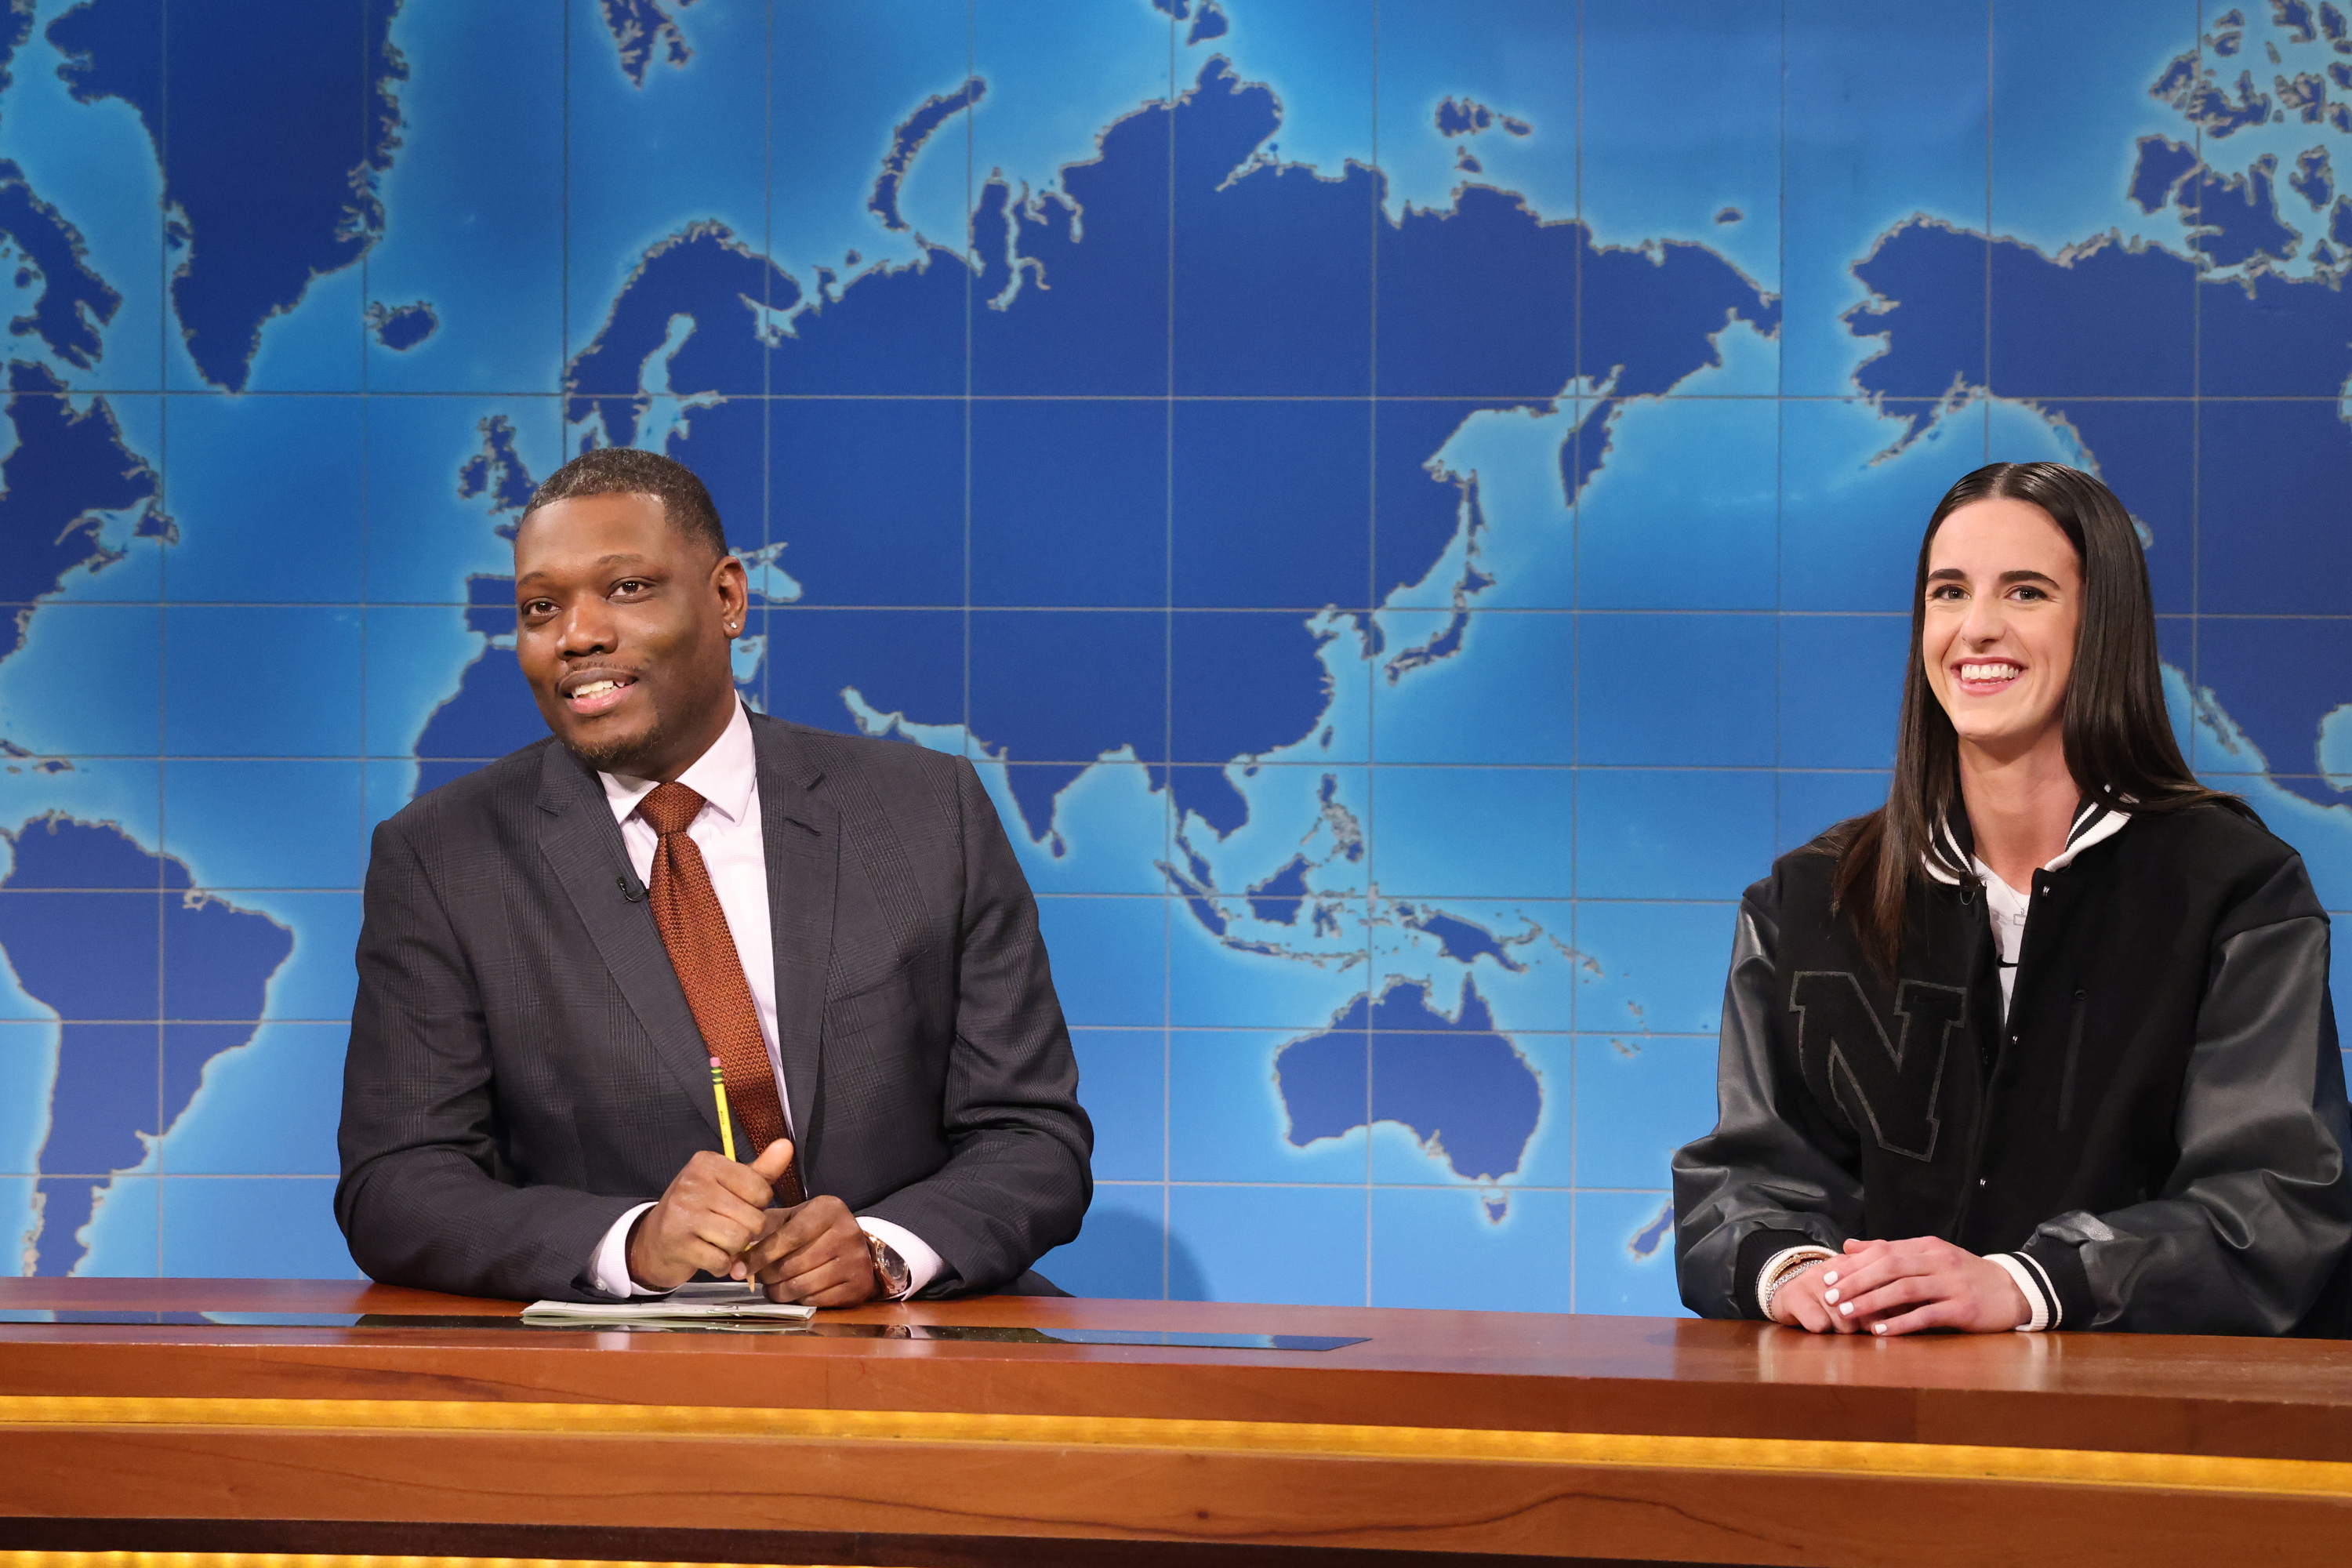 caitlin clark showed up on snl to dunk all over michael che